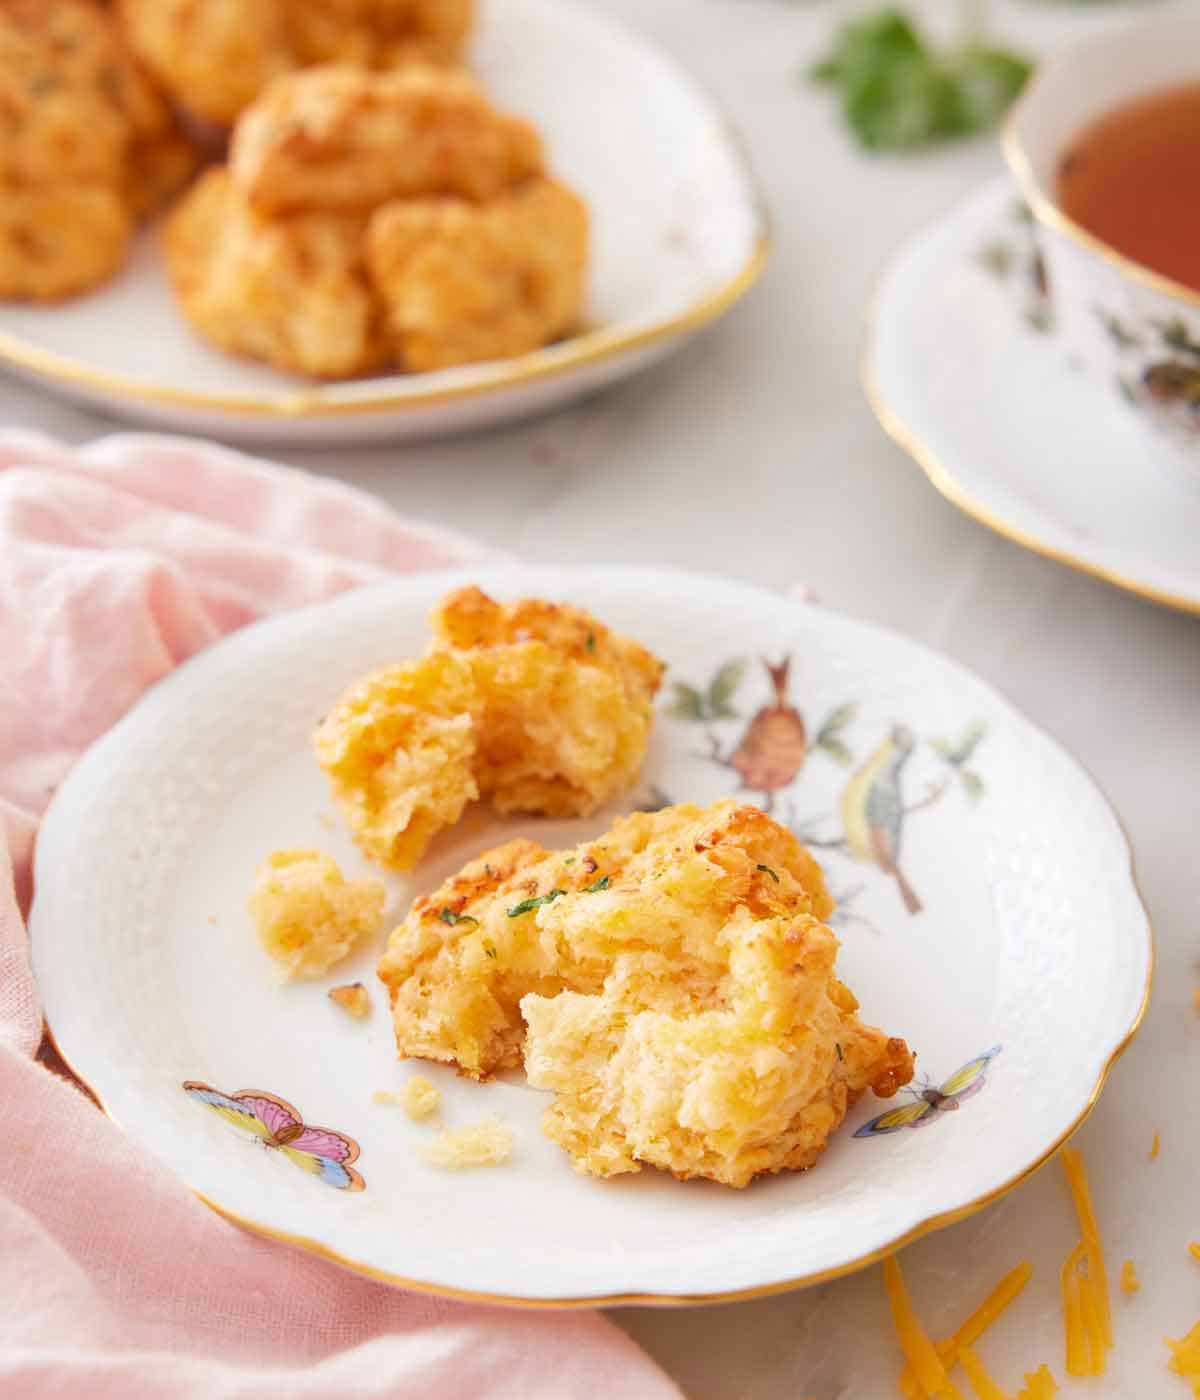 A plate with a cheddar biscuit torn apart with more biscuits and a cup of tea in the background.